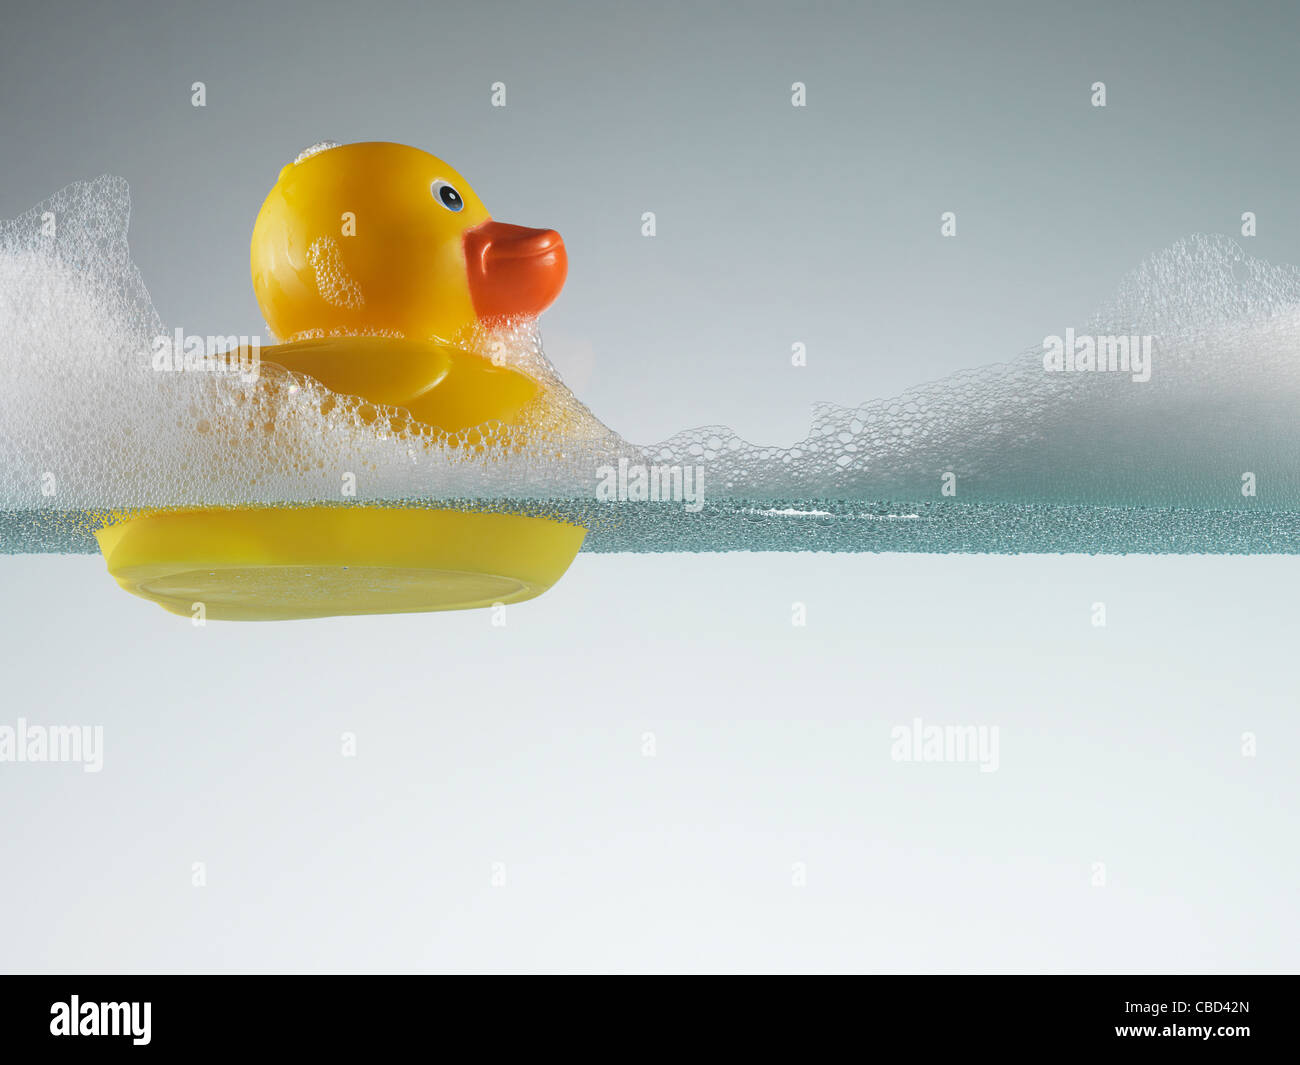 Rubber duck floating in soapy water Stock Photo